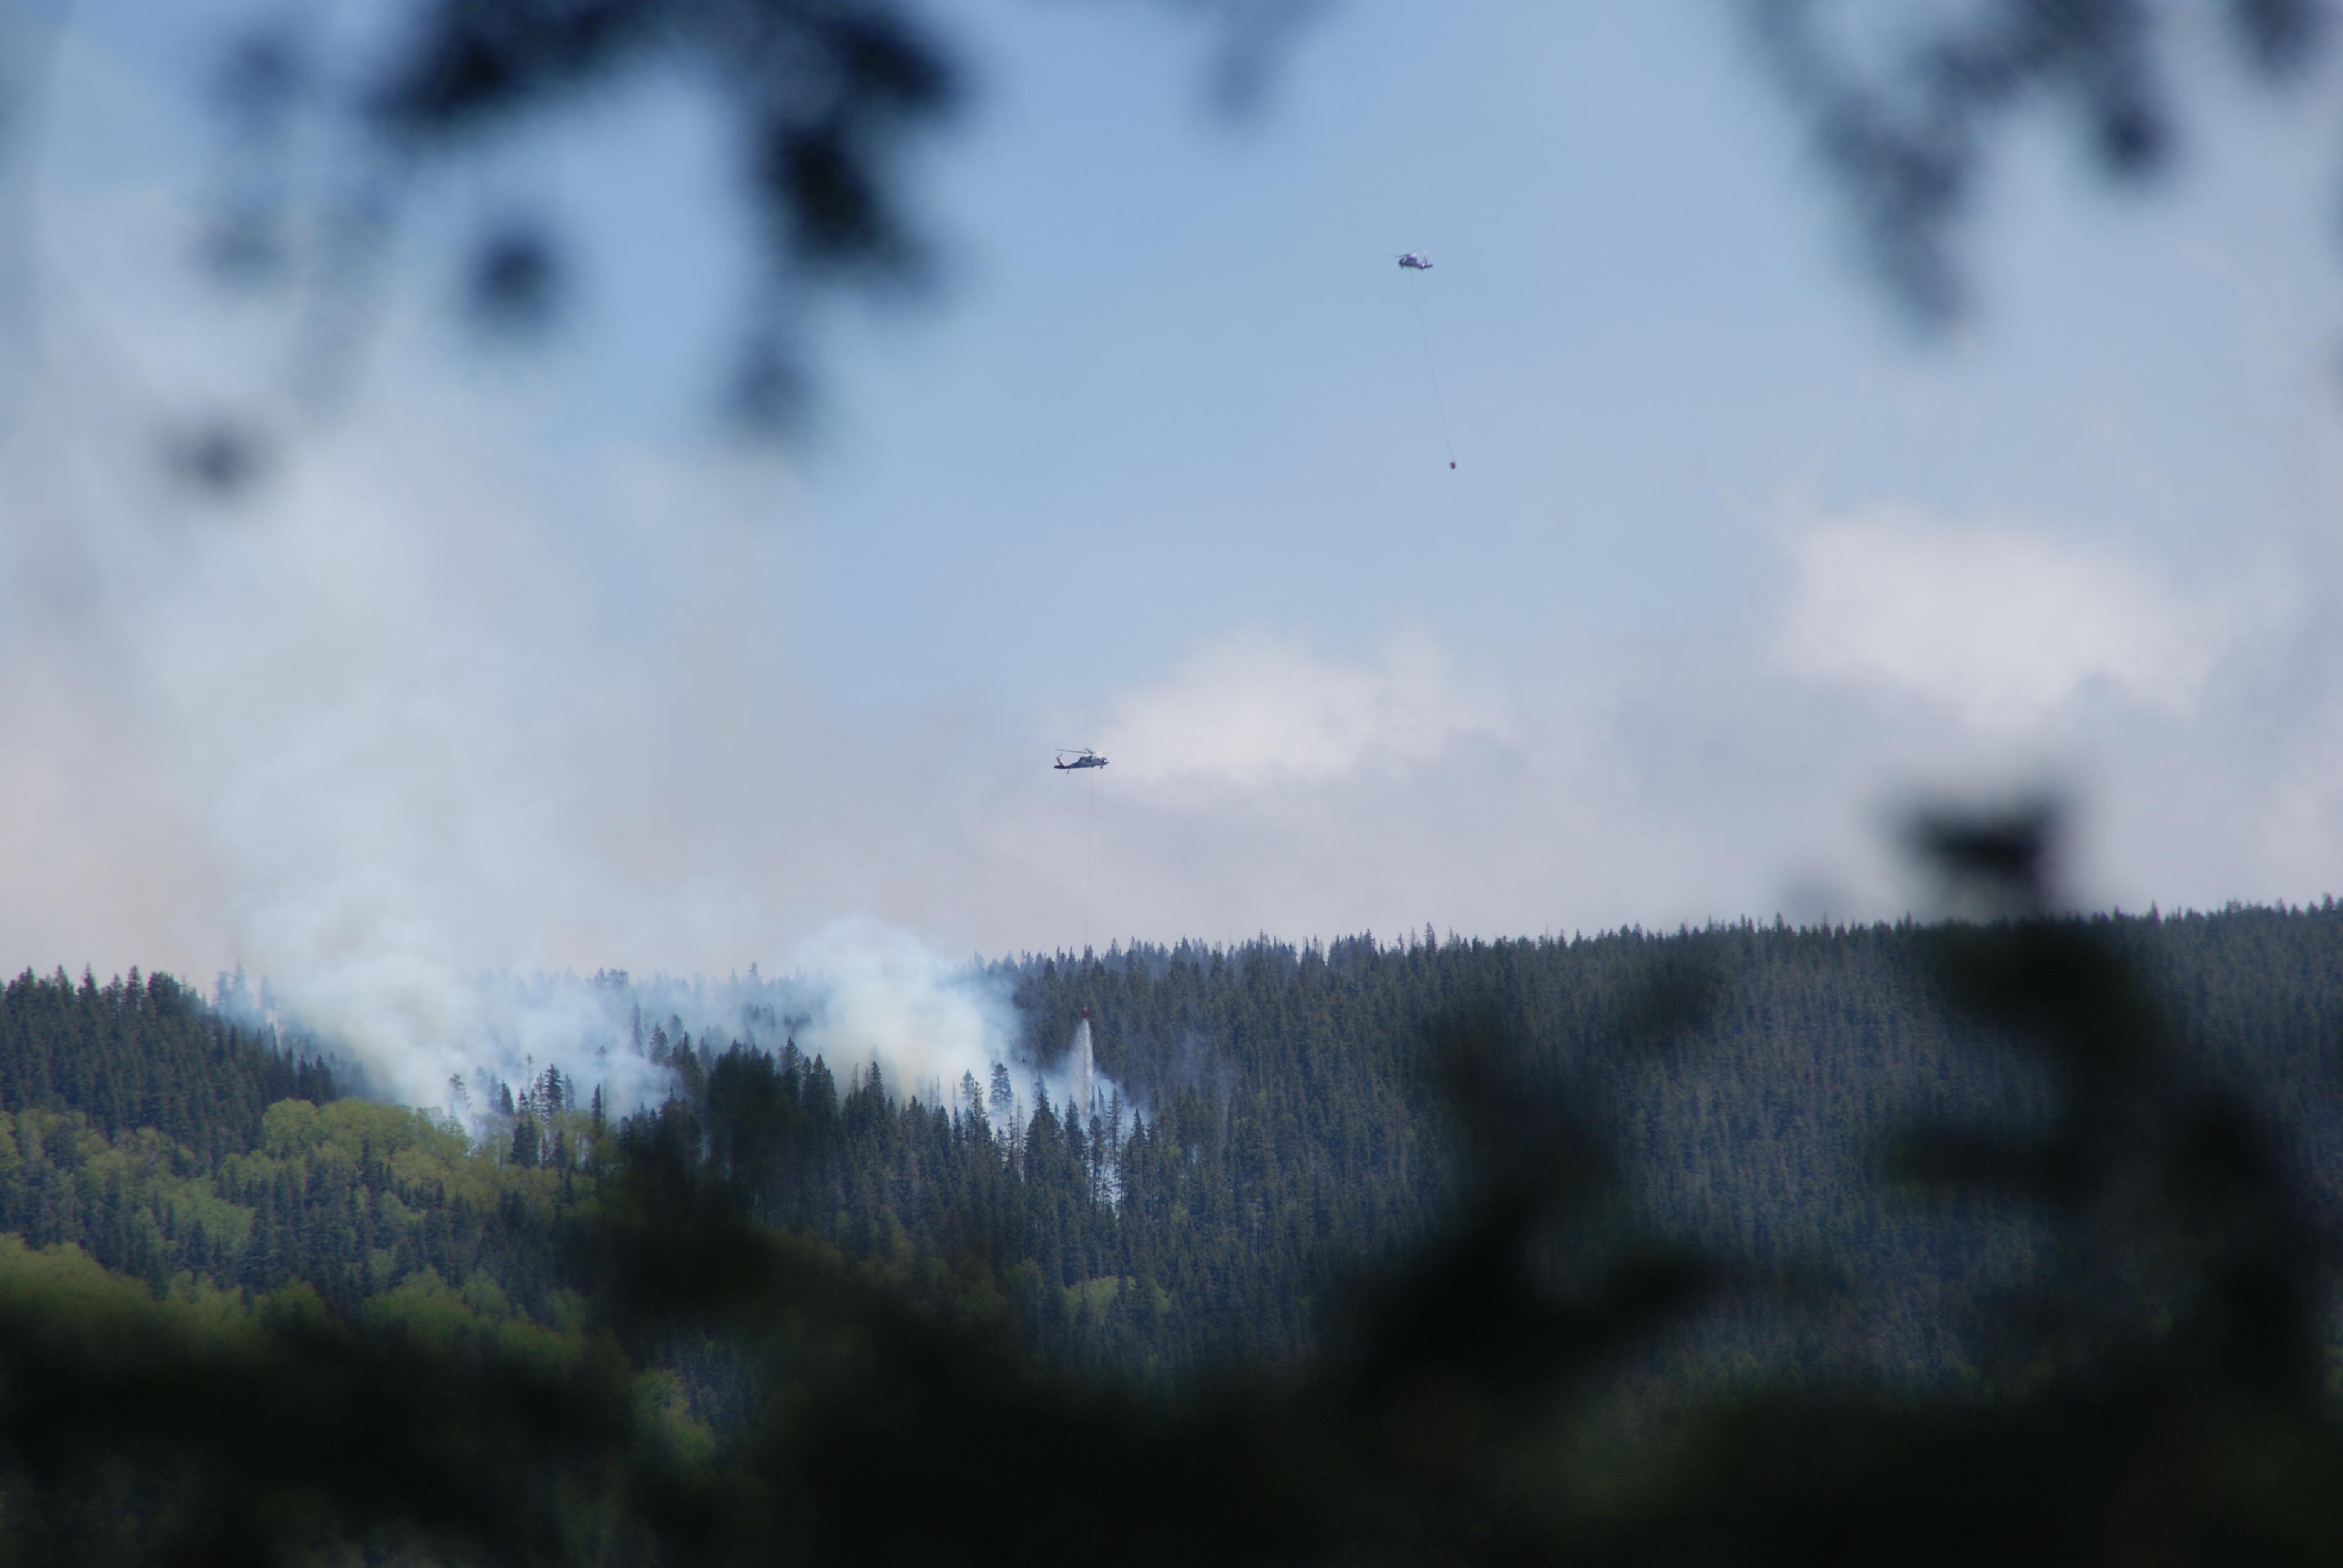 2 helicopters fly over heavily forested terrain. Each helicopter has a long line with a bucket attached to carry water and drop on fire as smoke rises from the trees.